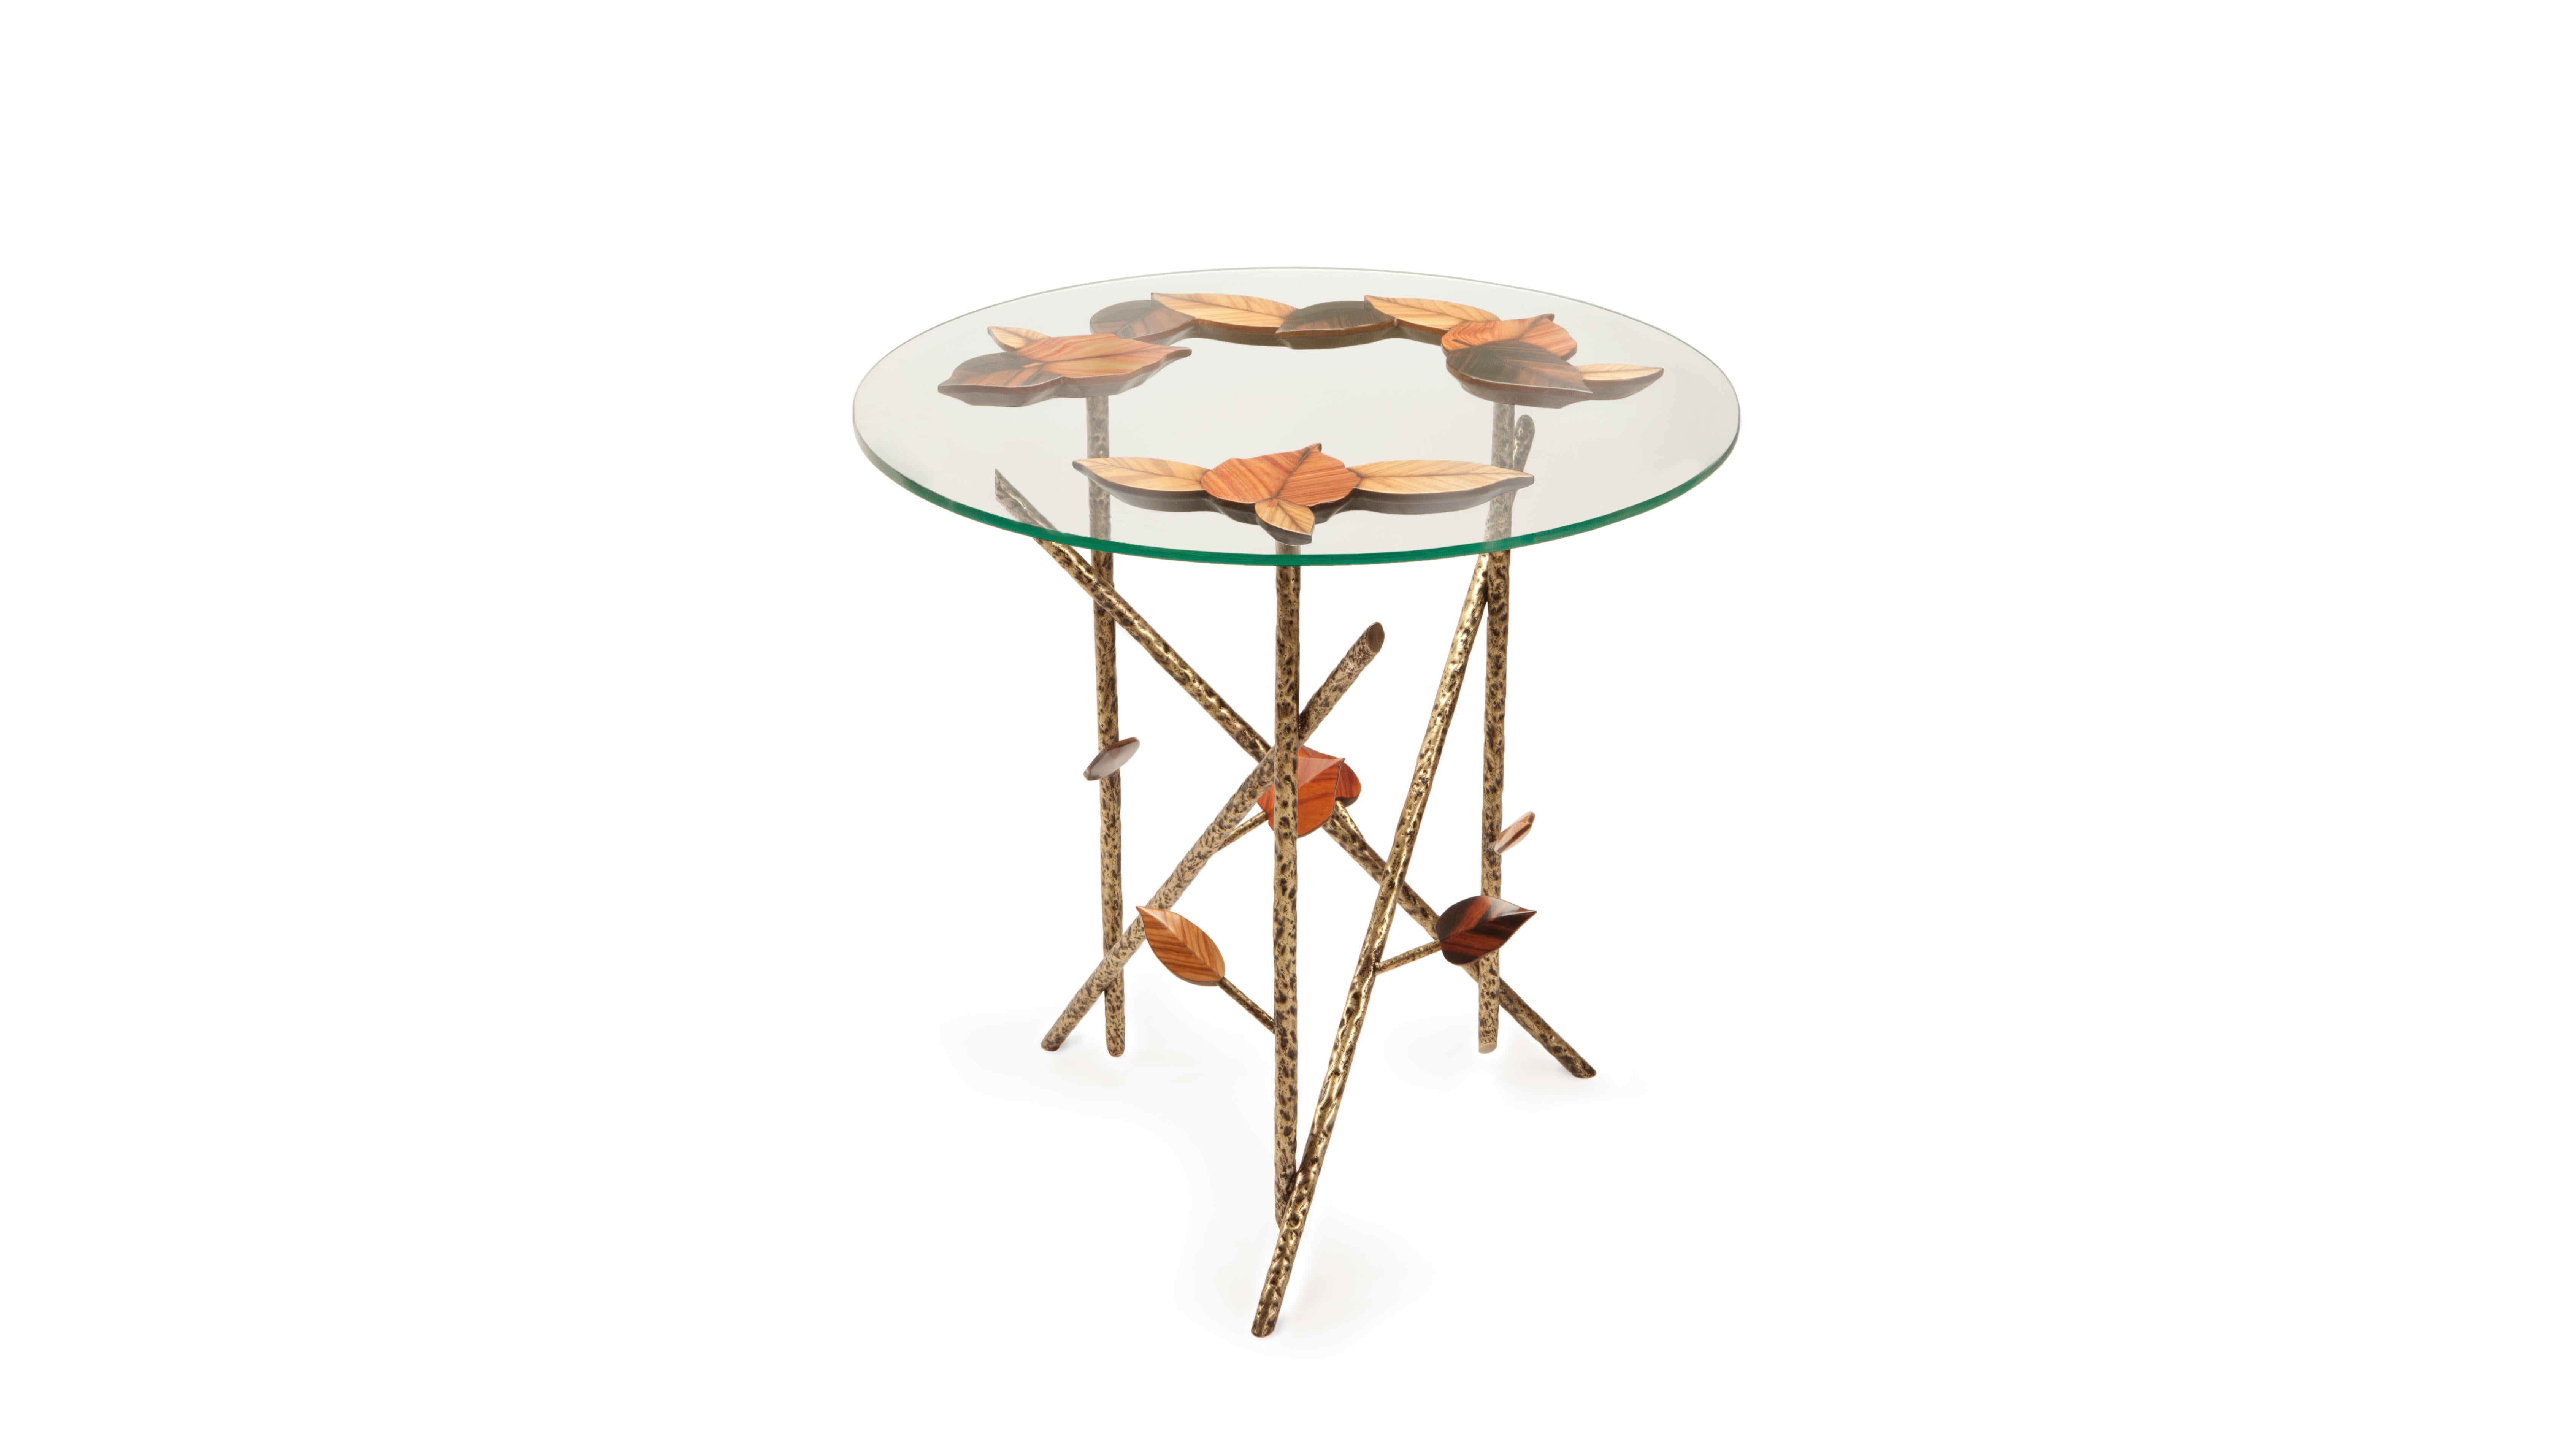 Tree Branches Side Table by InsidherLand
Dimensions: D 60 x W 60 x H 60 cm.
Materials: wood structure with marquetry work in rosewood, ebony and olive tree veneers in half gloss varnish, hammered brass with patinated effect finished in matt varnish,